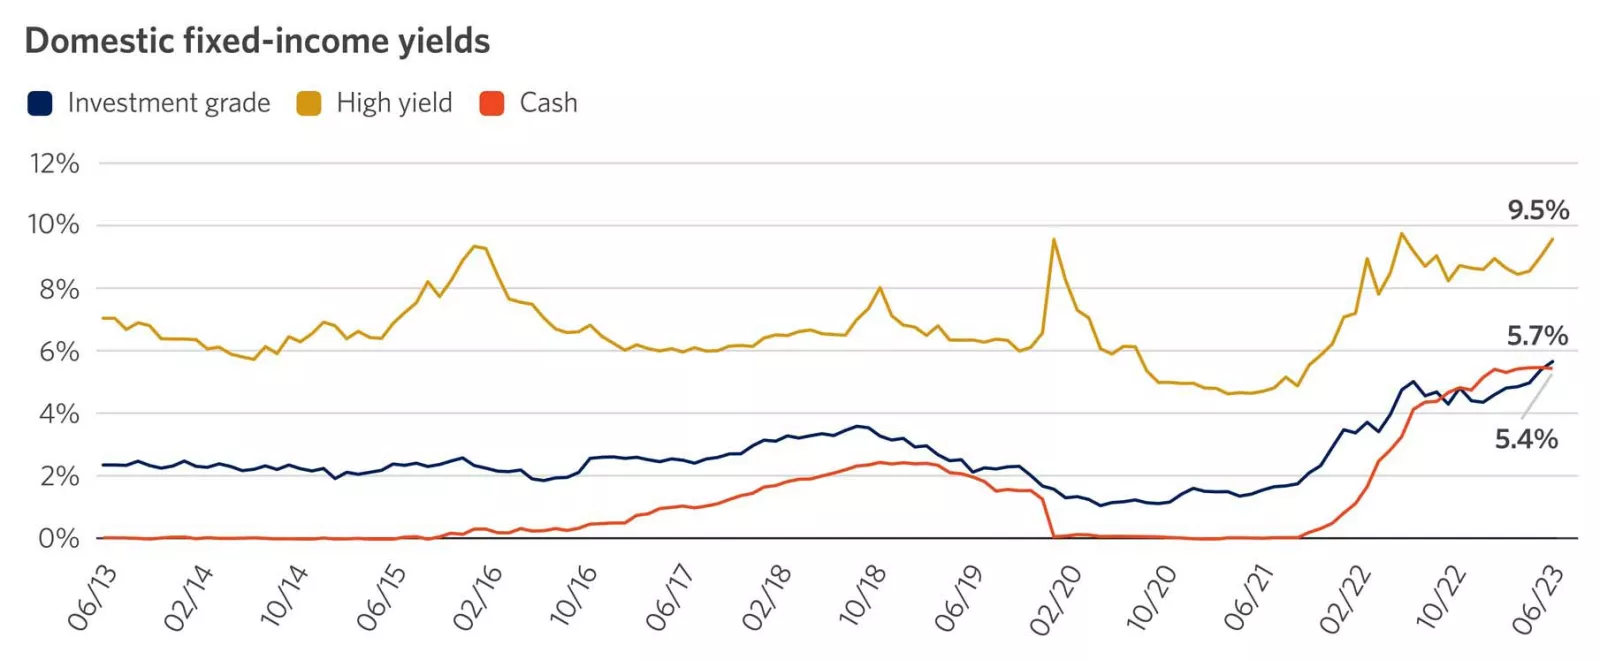 The graph shows the yield for cash, investment grade bonds, and high yield bonds as of 5/31/2022